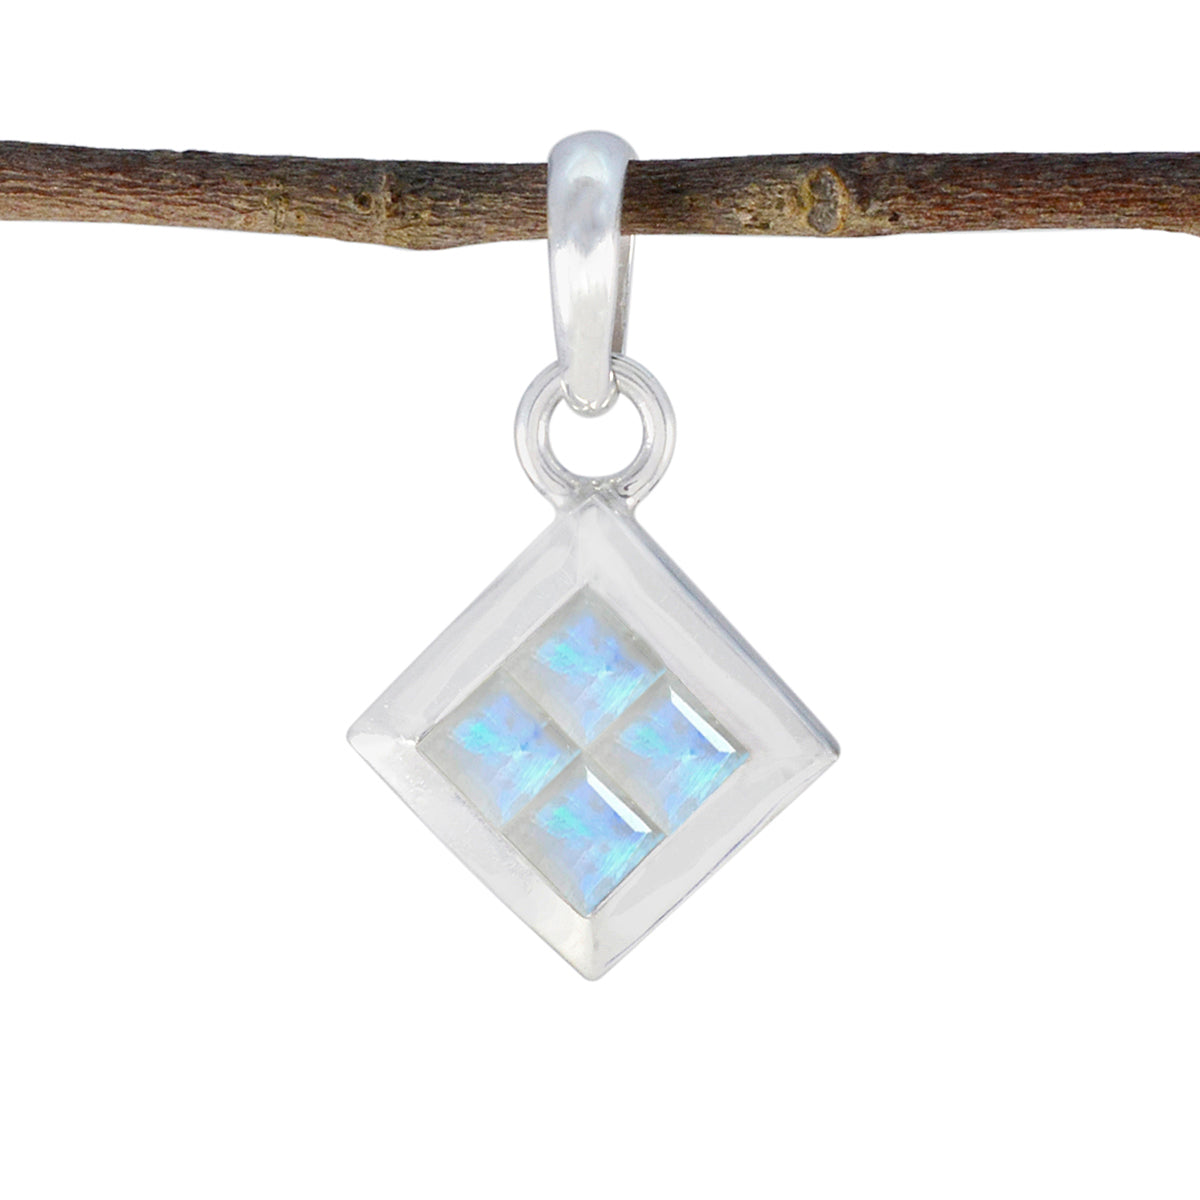 Riyo Drop Gems Square Faceted White Rainbow Moonstone Silver Pendant Gift For Wife